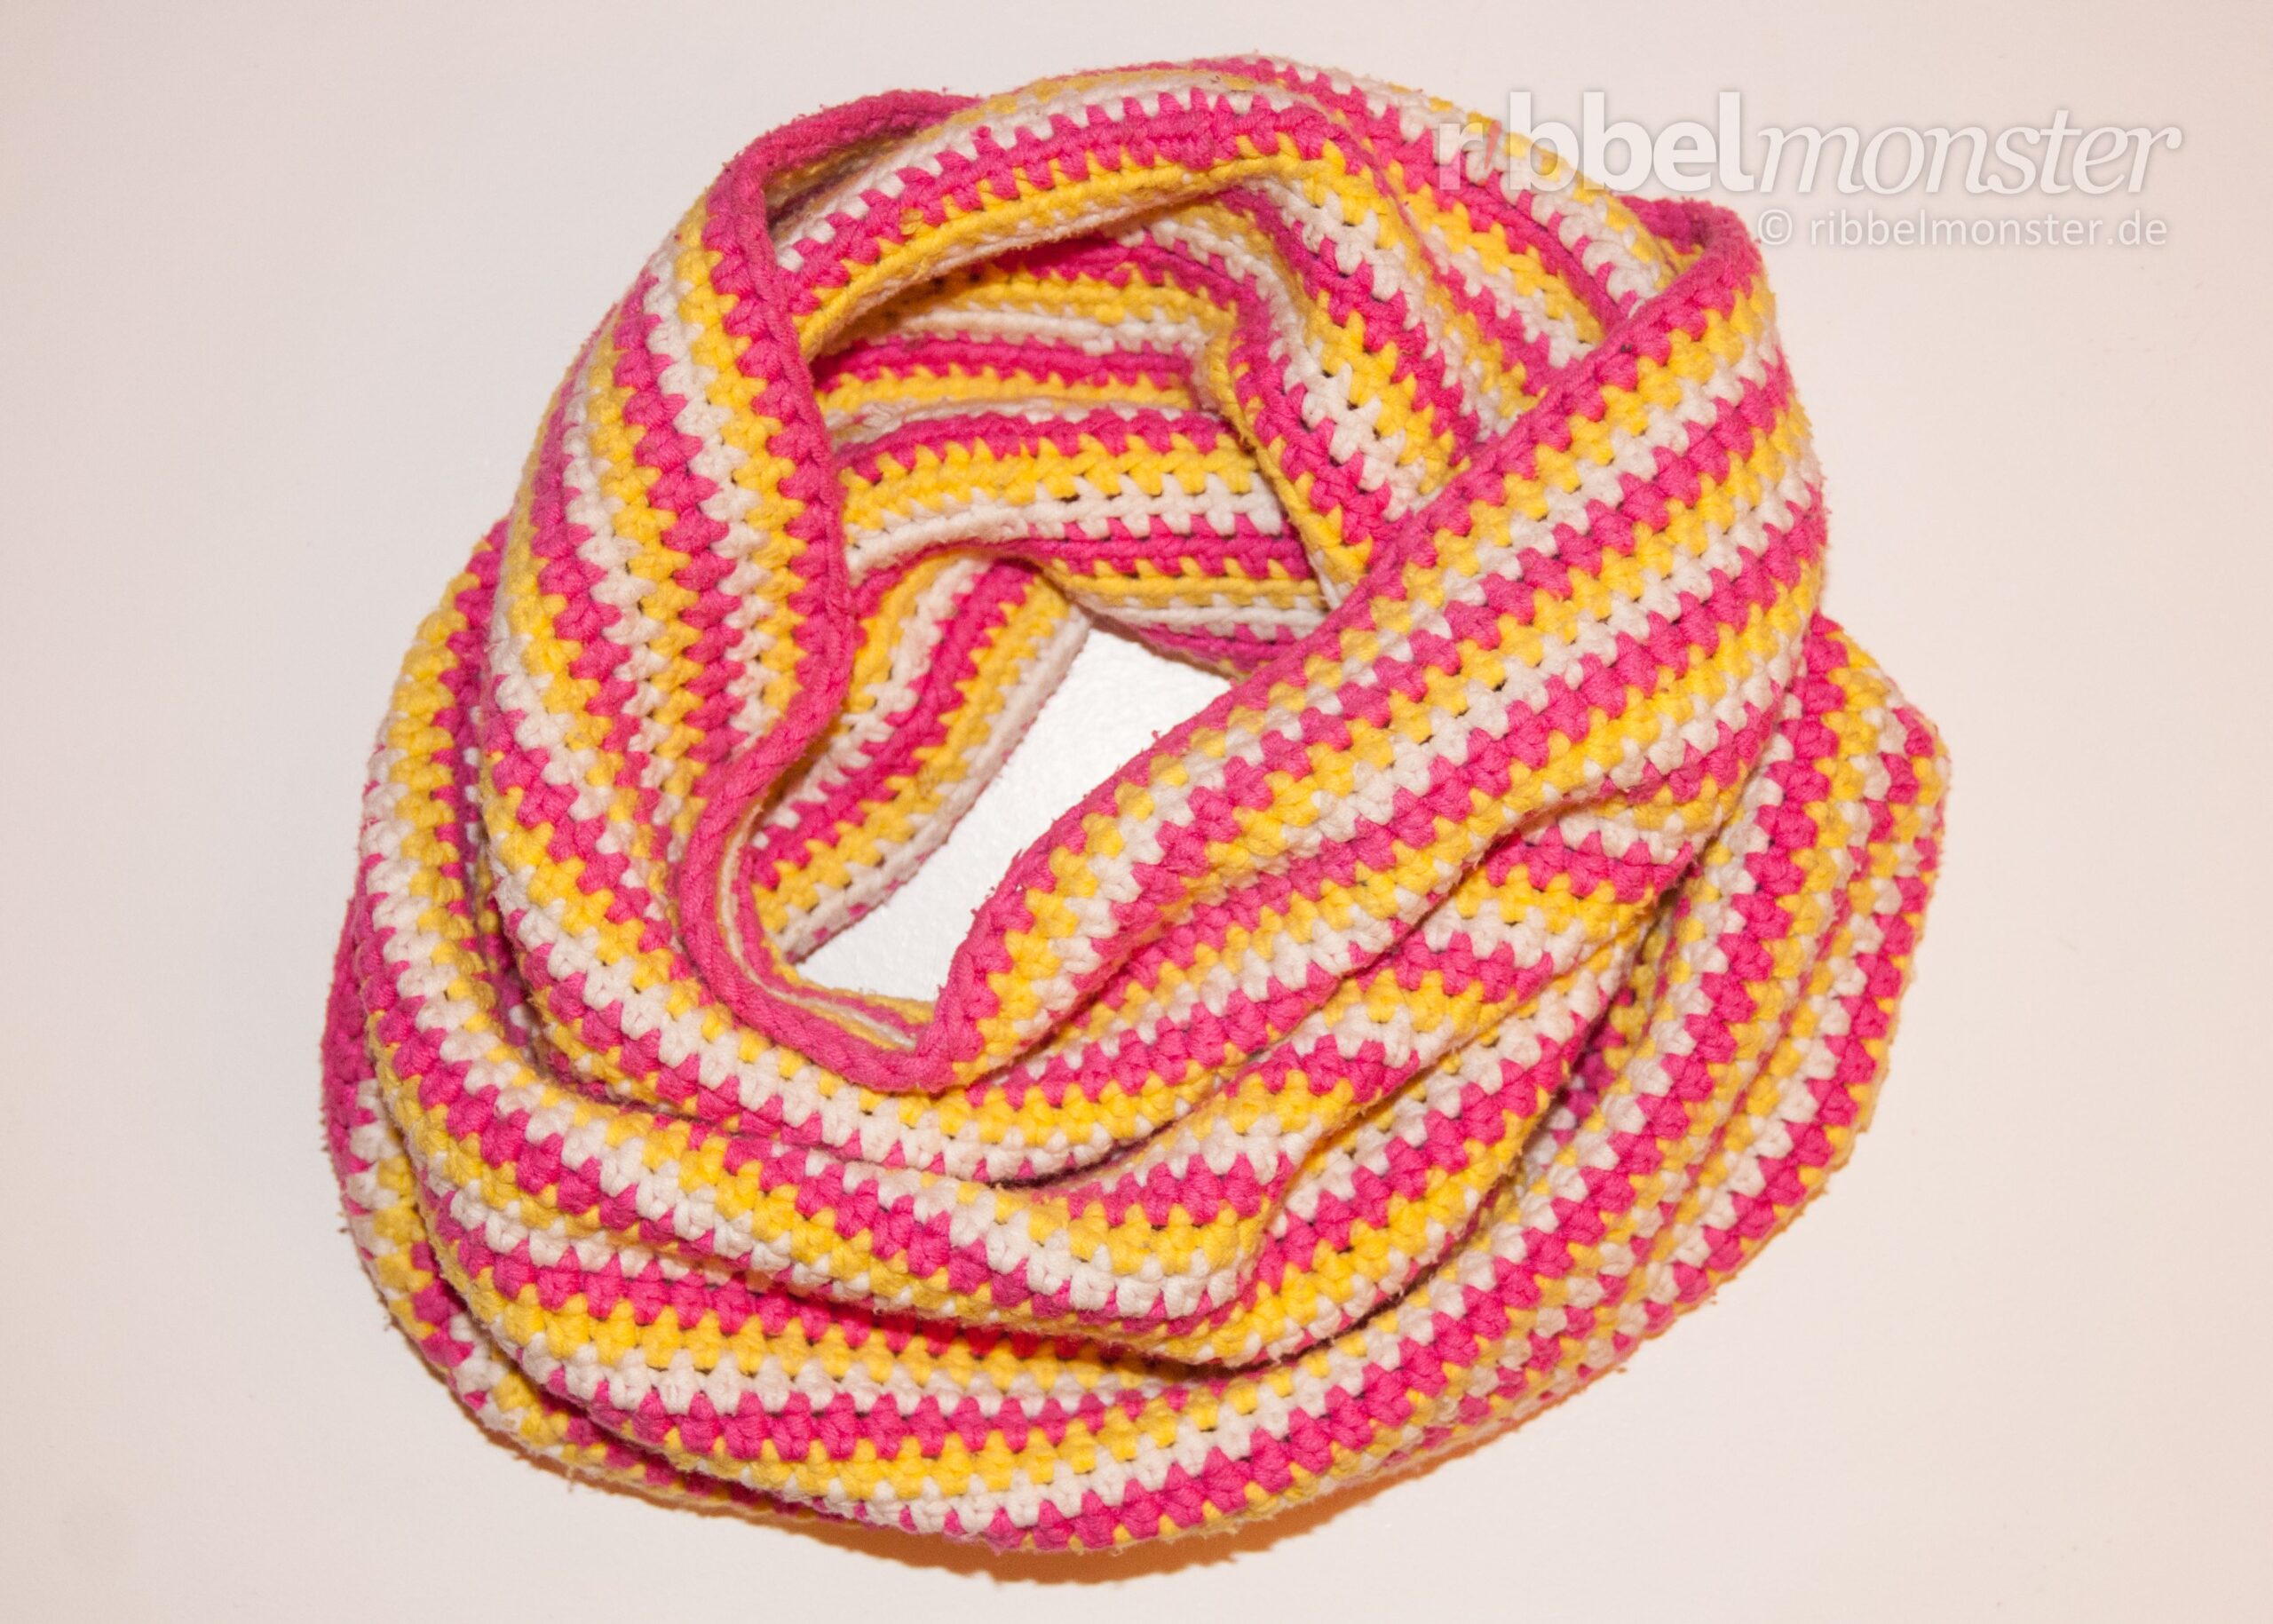 Crochet Loop – with Half Double Crochet Stitches